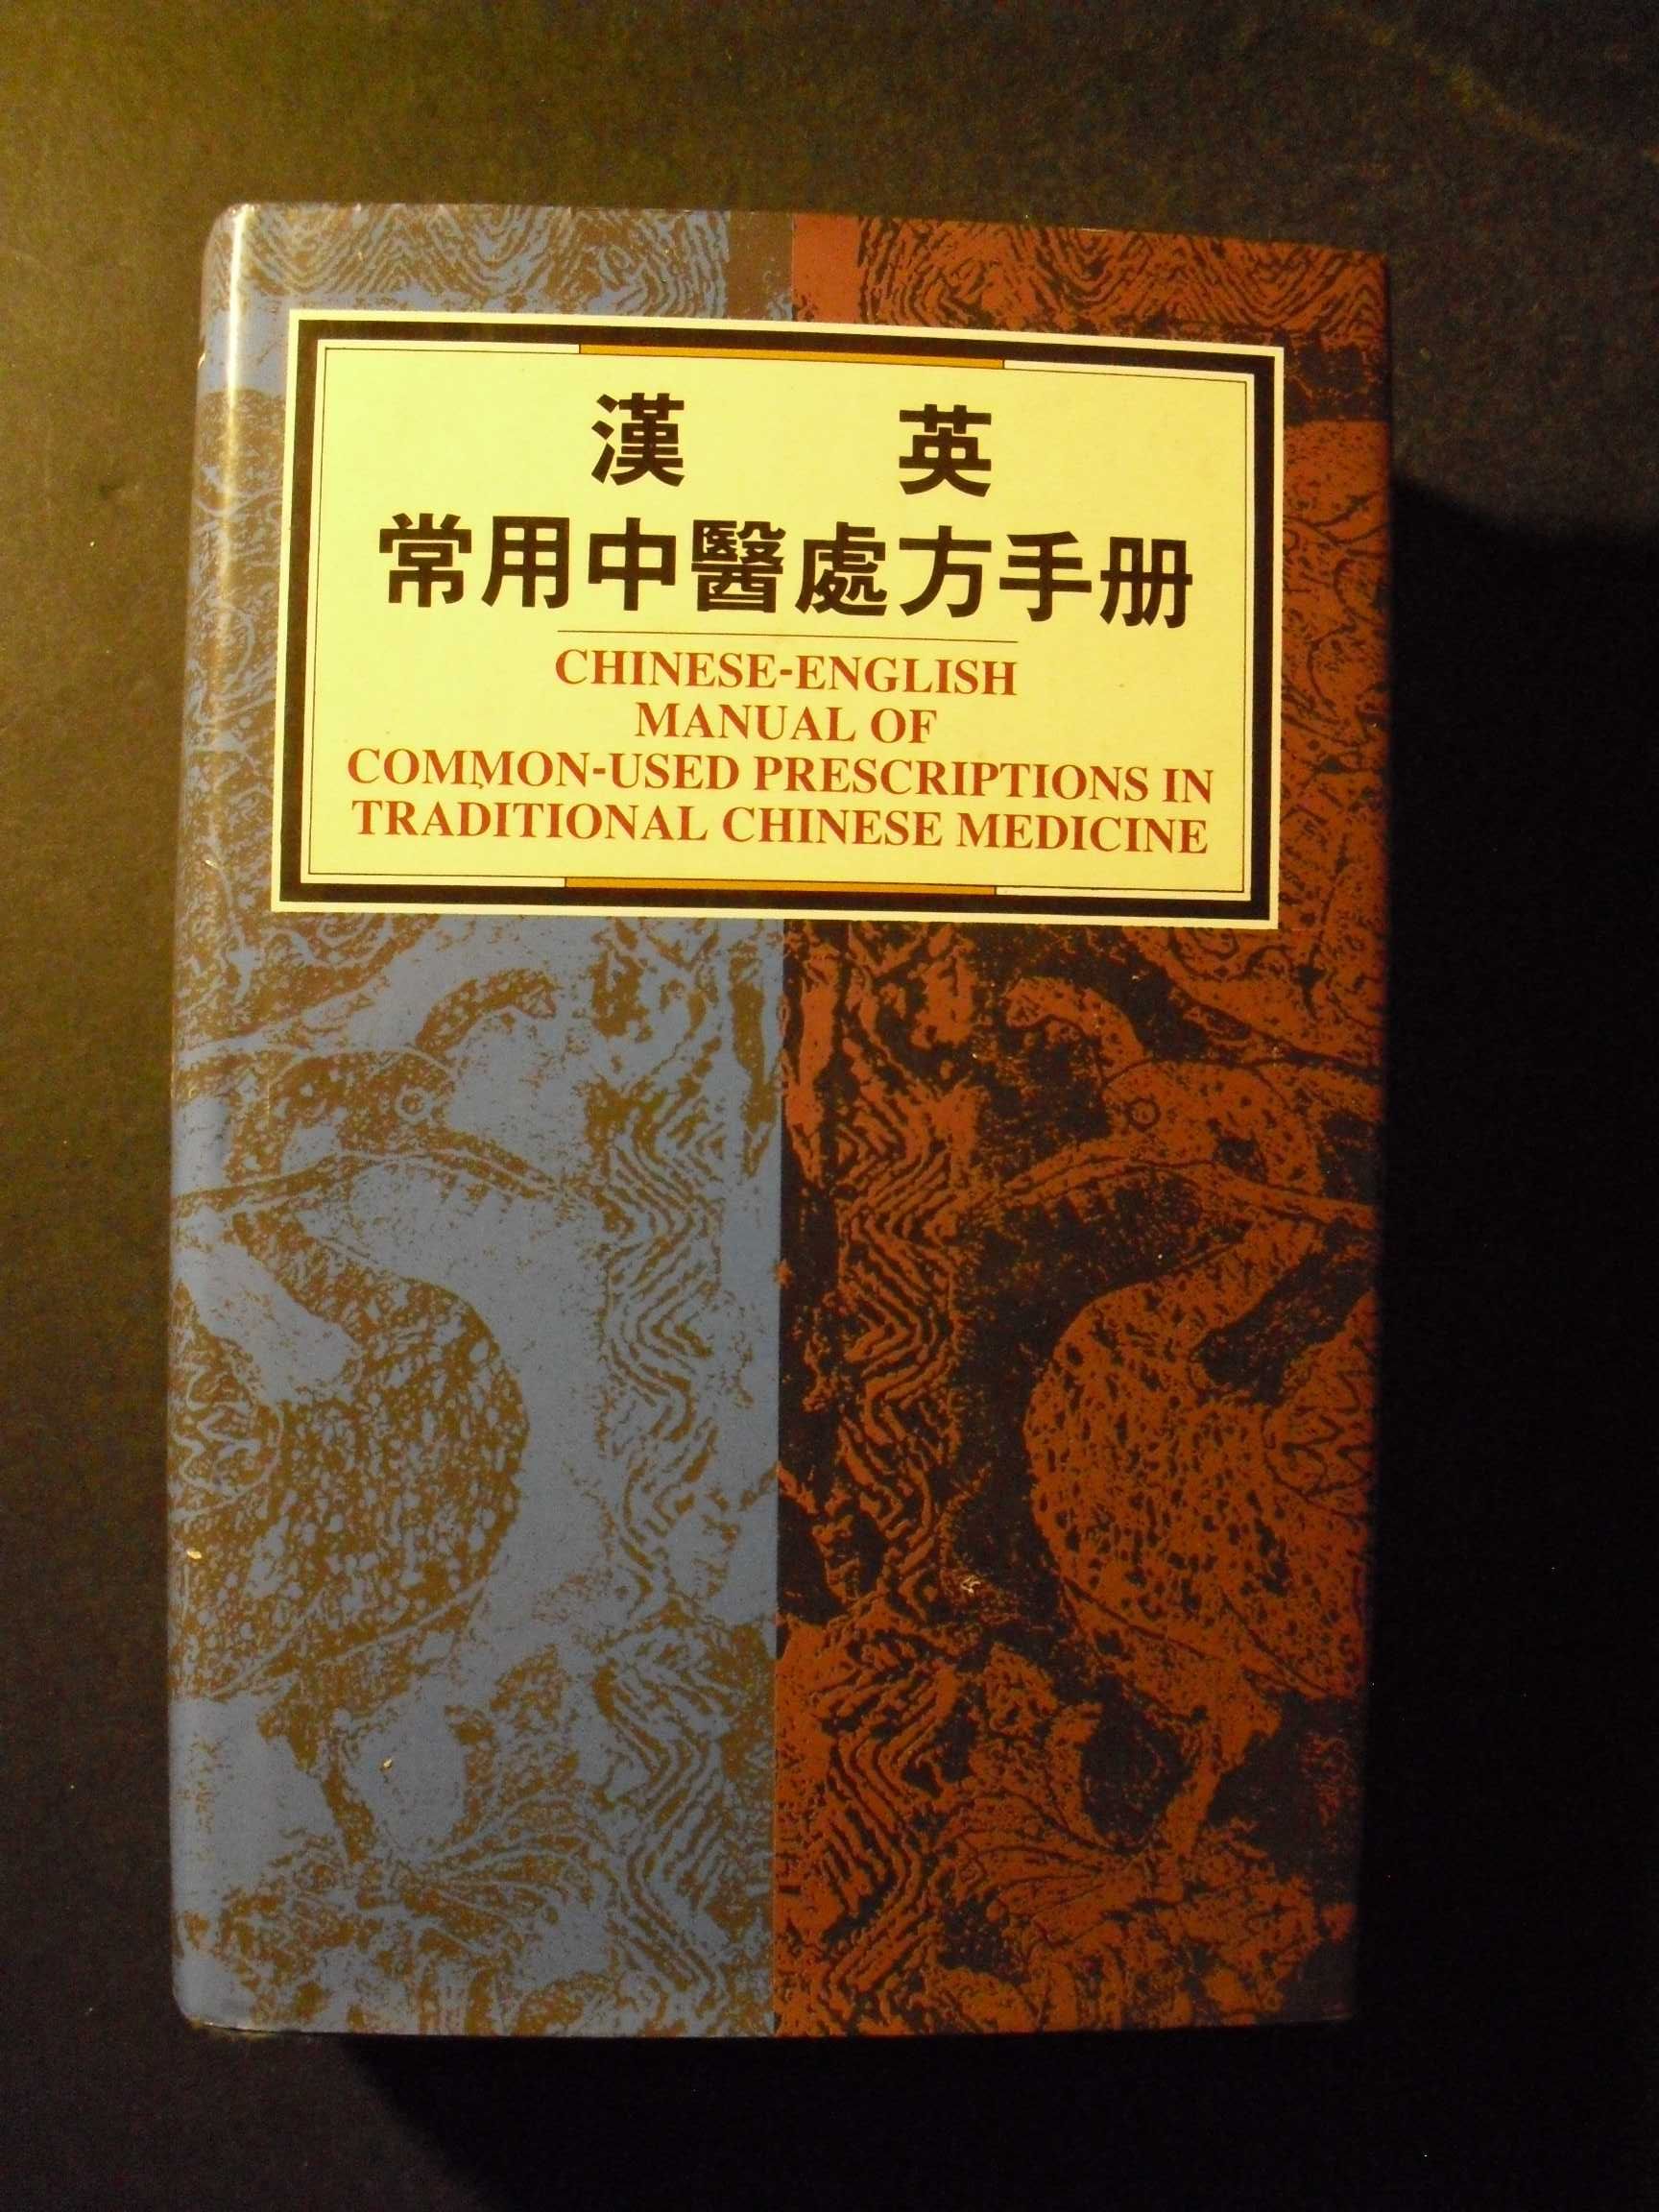 Ming (Ou,Chief Editor);Chinese-English-Manual of Common Used